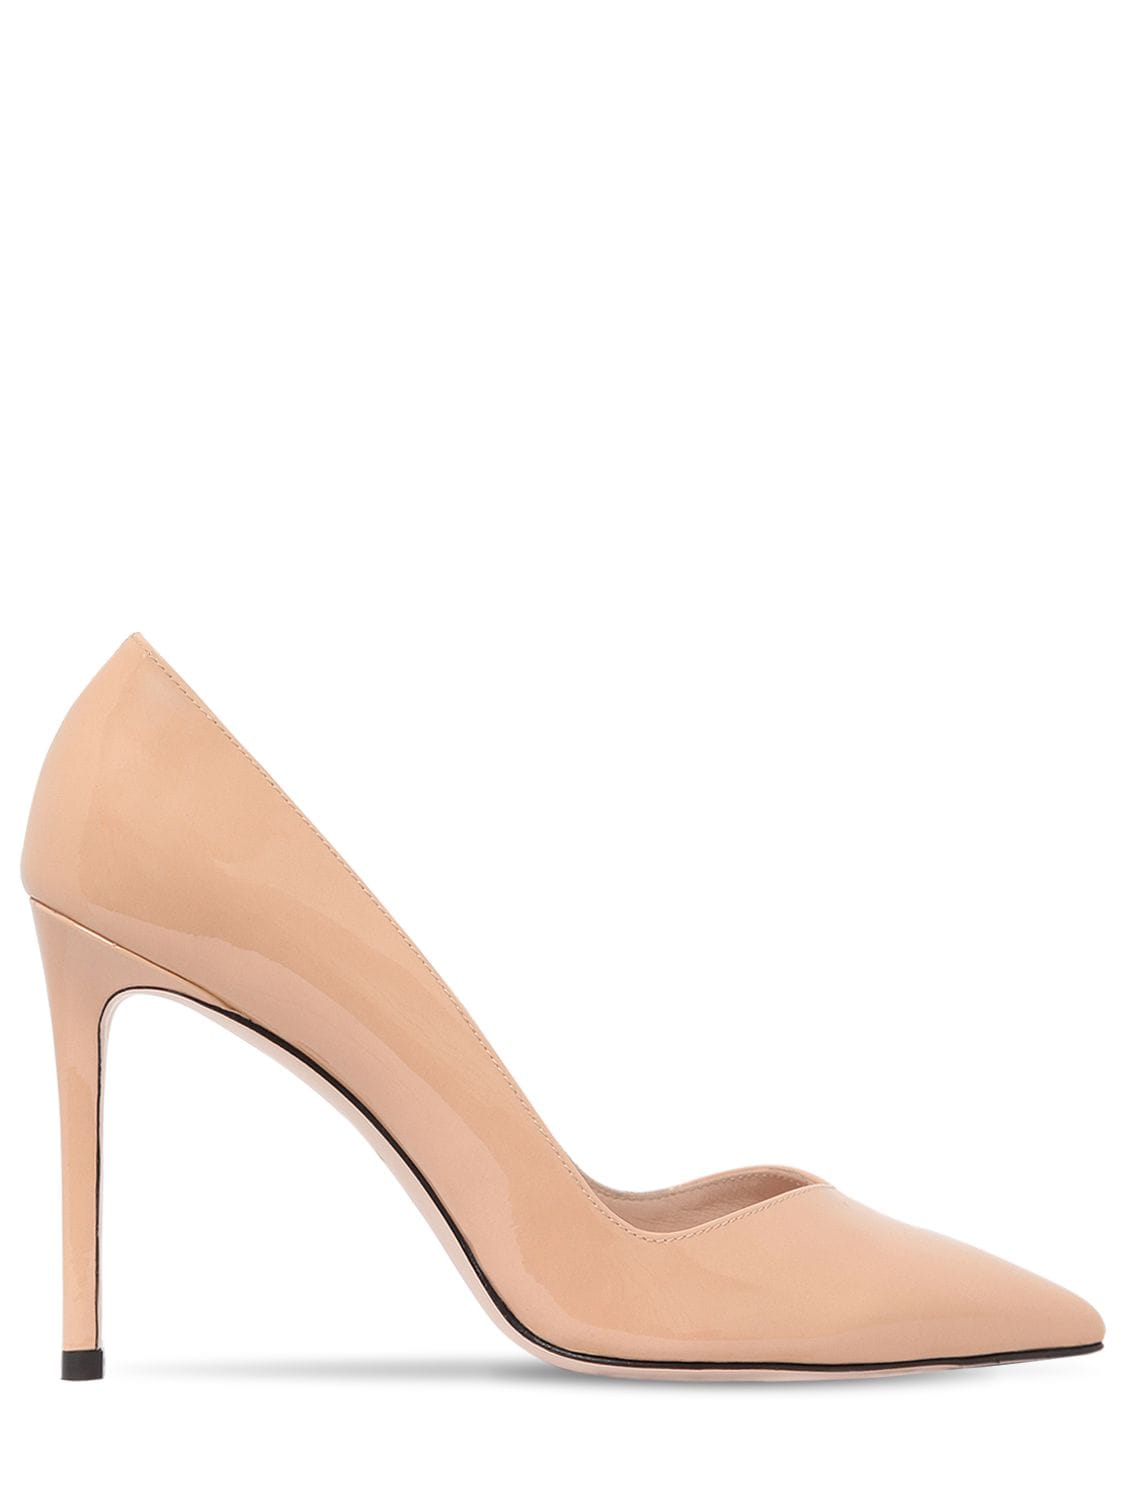 Stuart Weitzman 95mm Anny Patent Leather Pumps In Nude